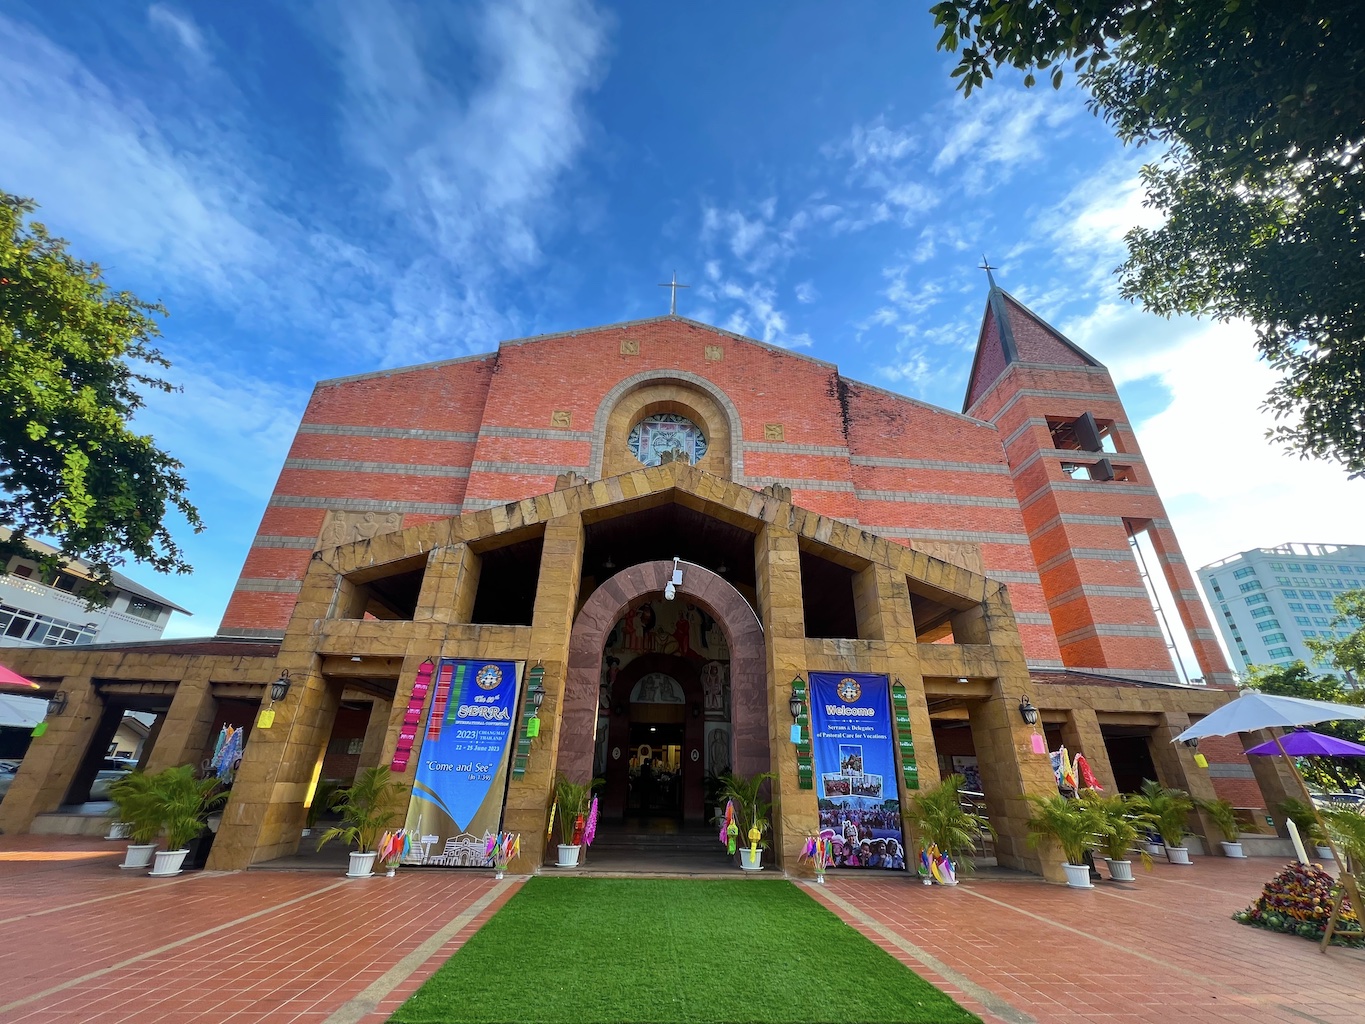 Exterior of the Cathedral of the Sacred Heart of Jesus in Chiang Mai, Thailand